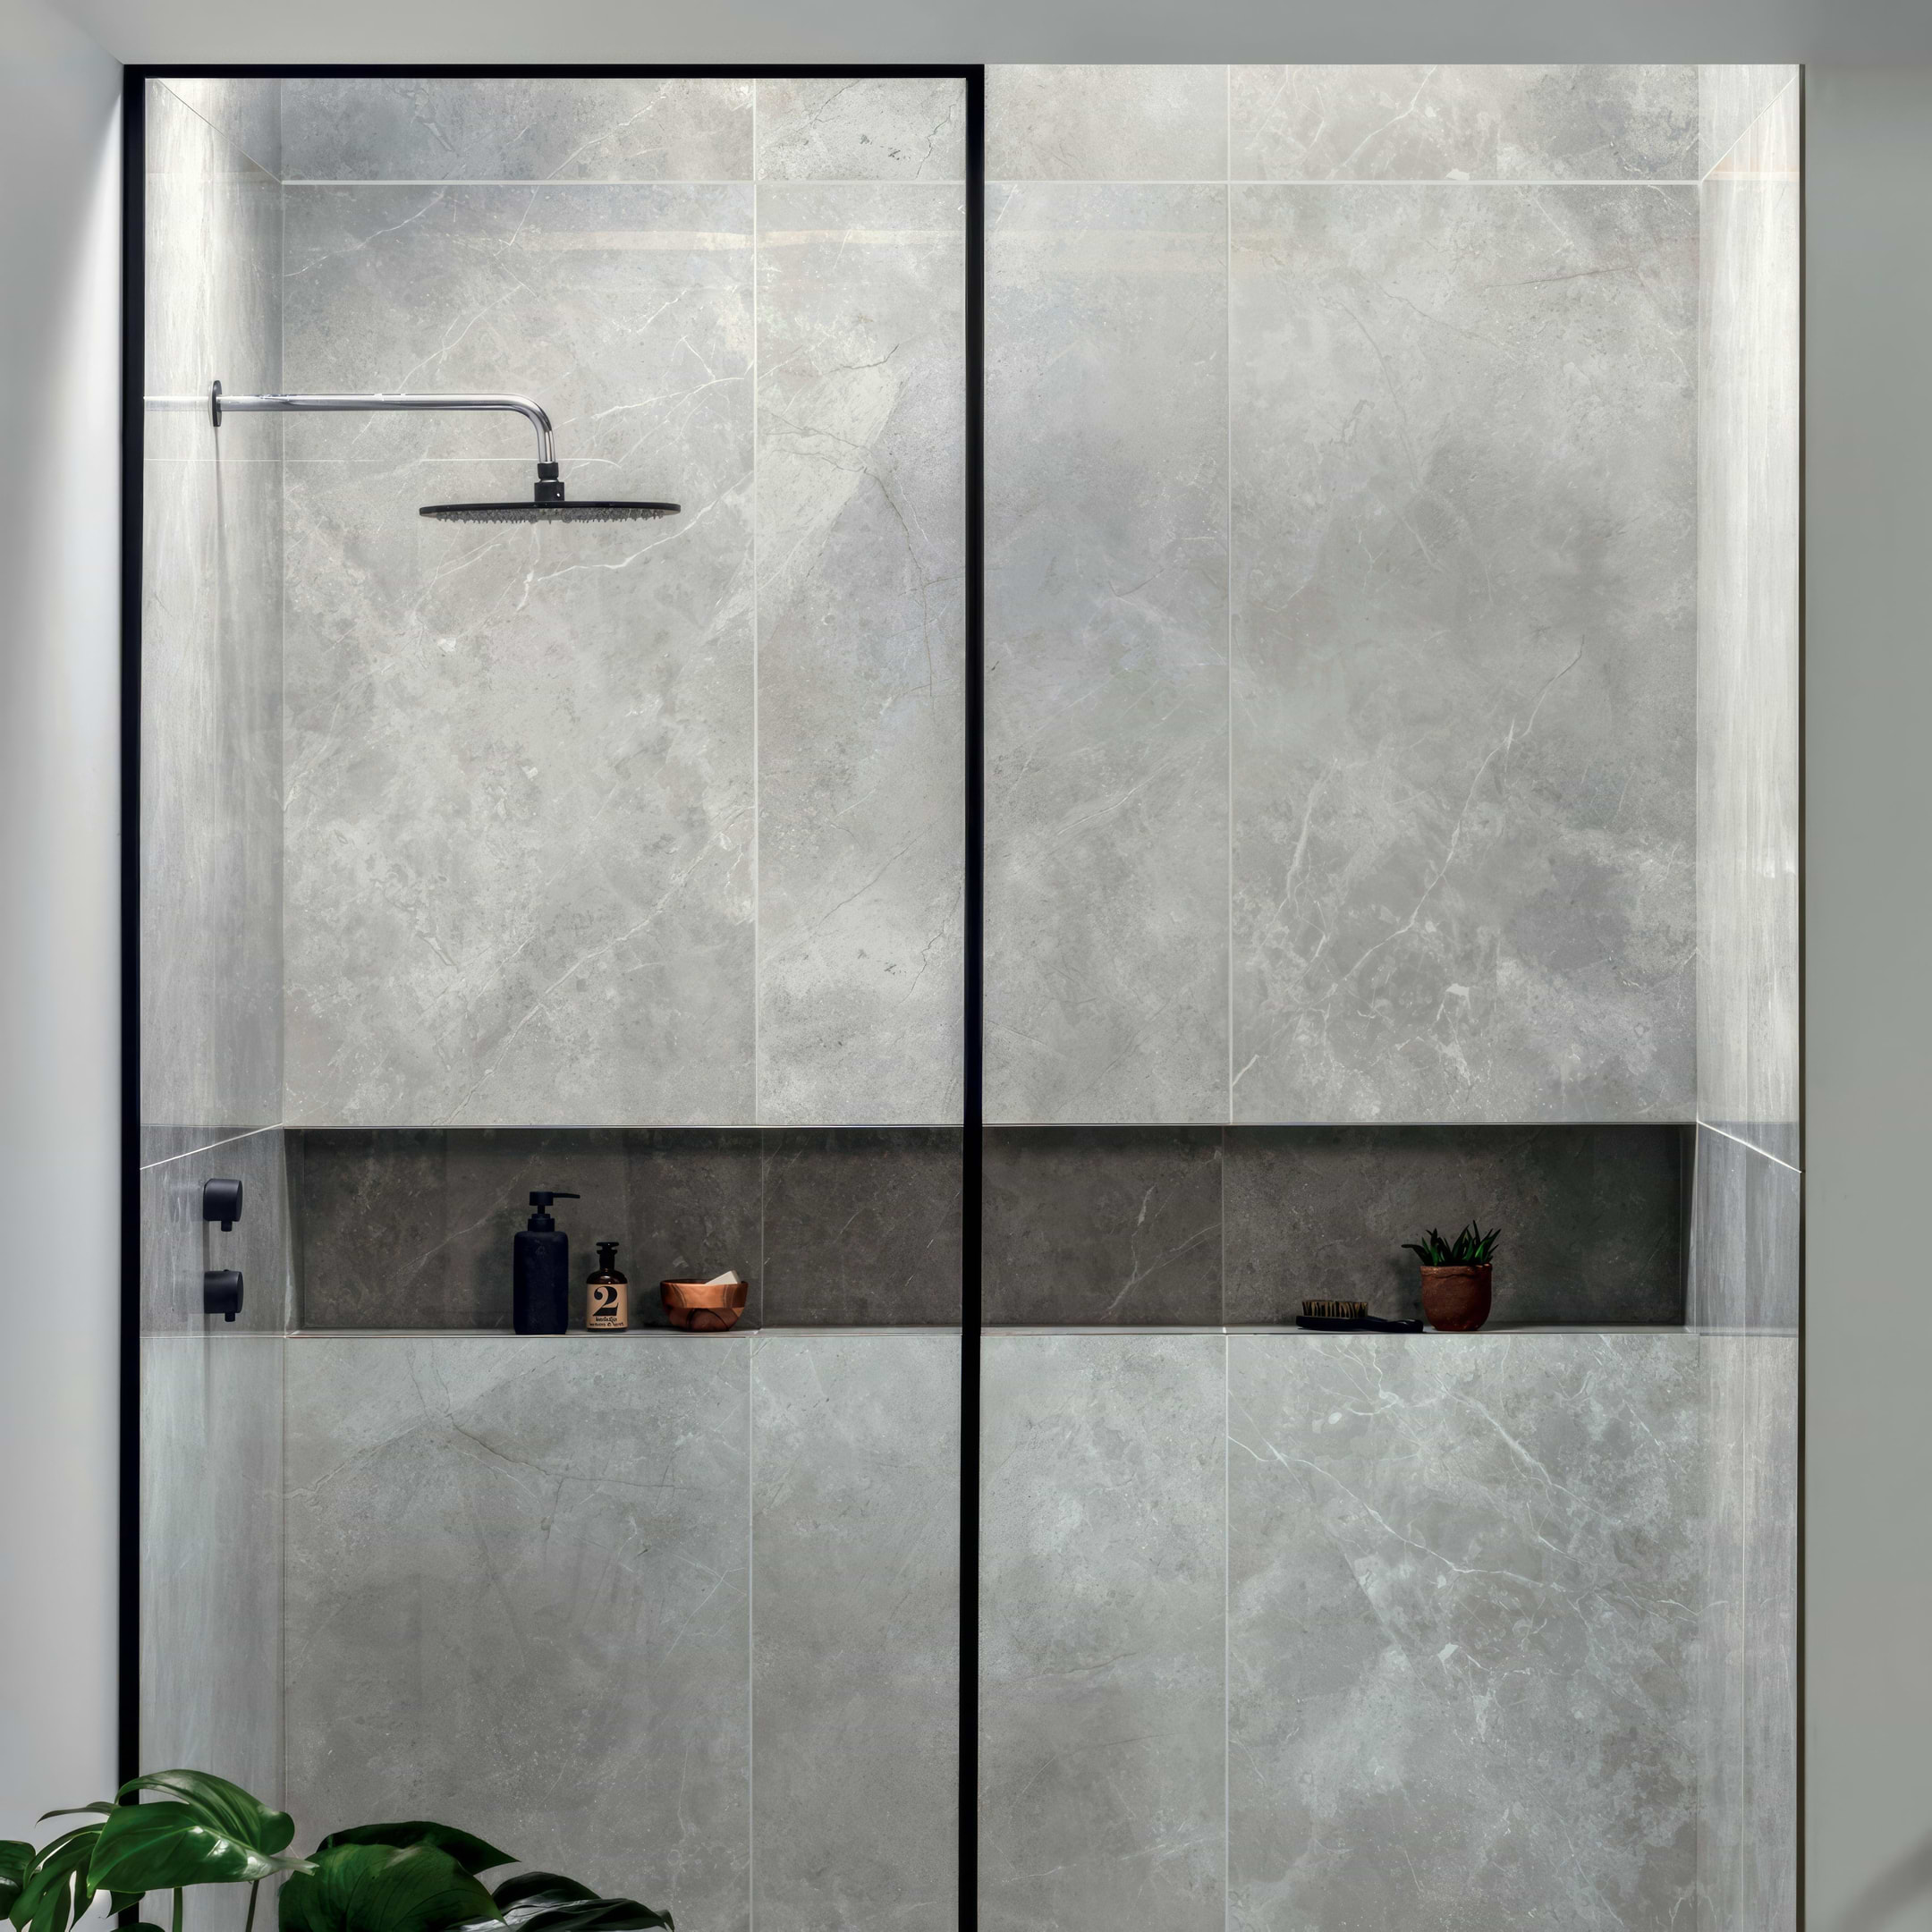 St Martin 120x60 Polished - Hyperion Tiles